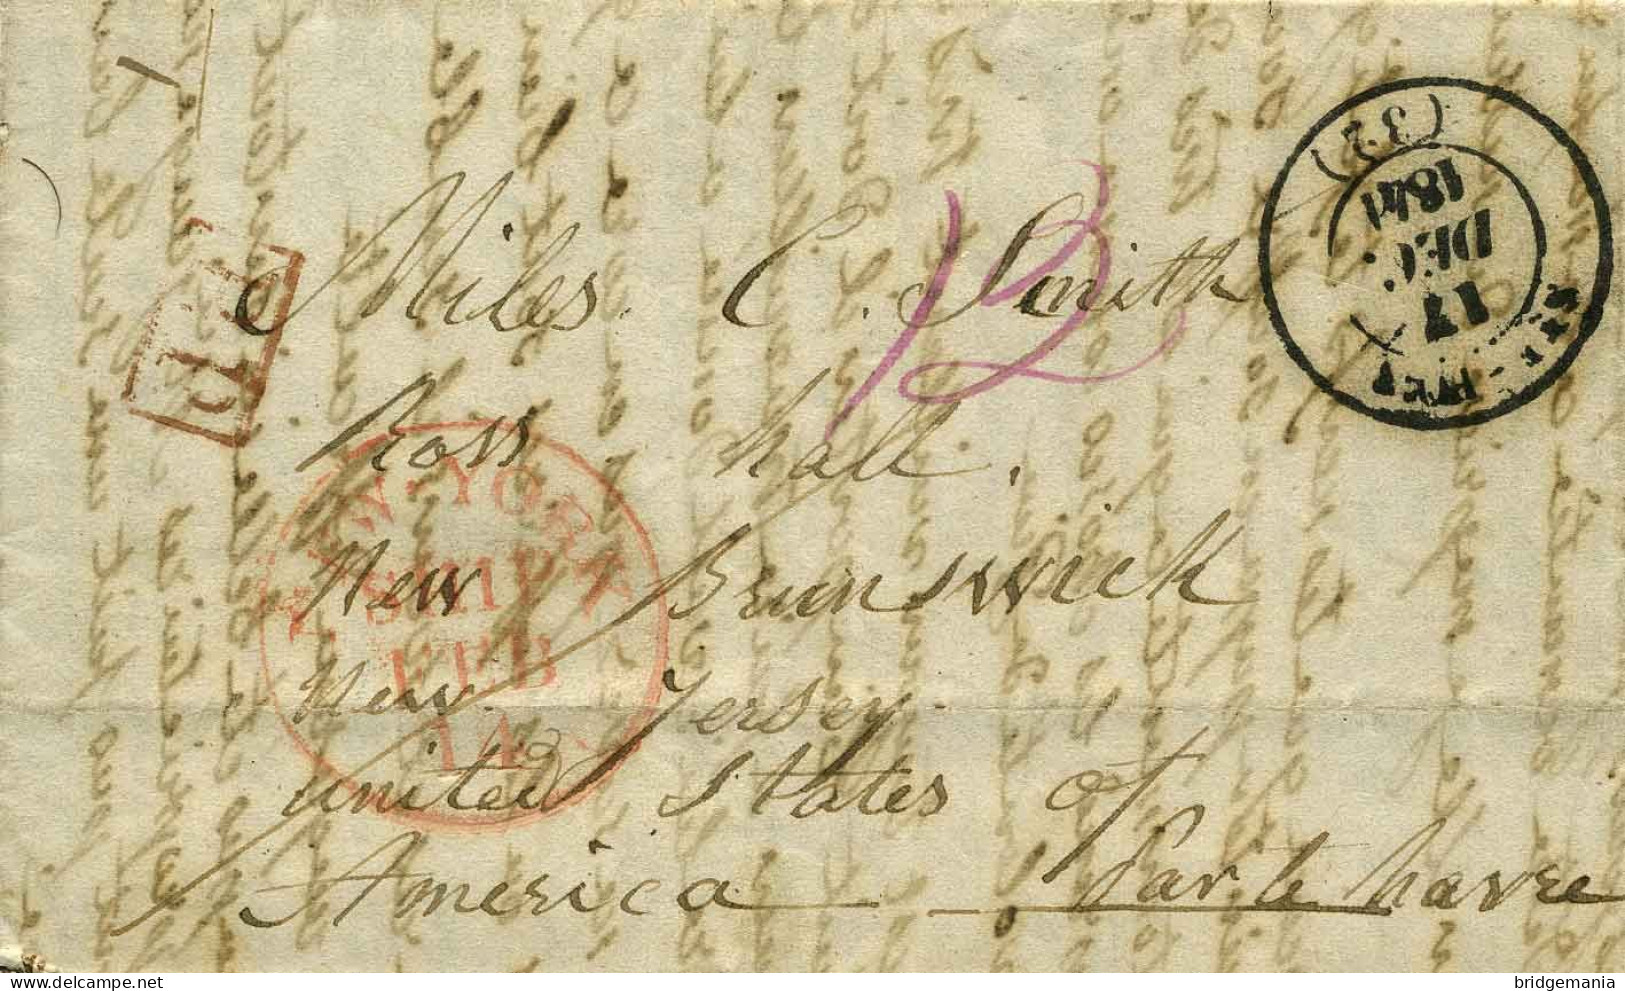 MTM119 - 1841 TRANSATLANTIC LETTER FRANCE TO USA NON-CONTRACT STEAM. SIMPLE RATE - Postal History